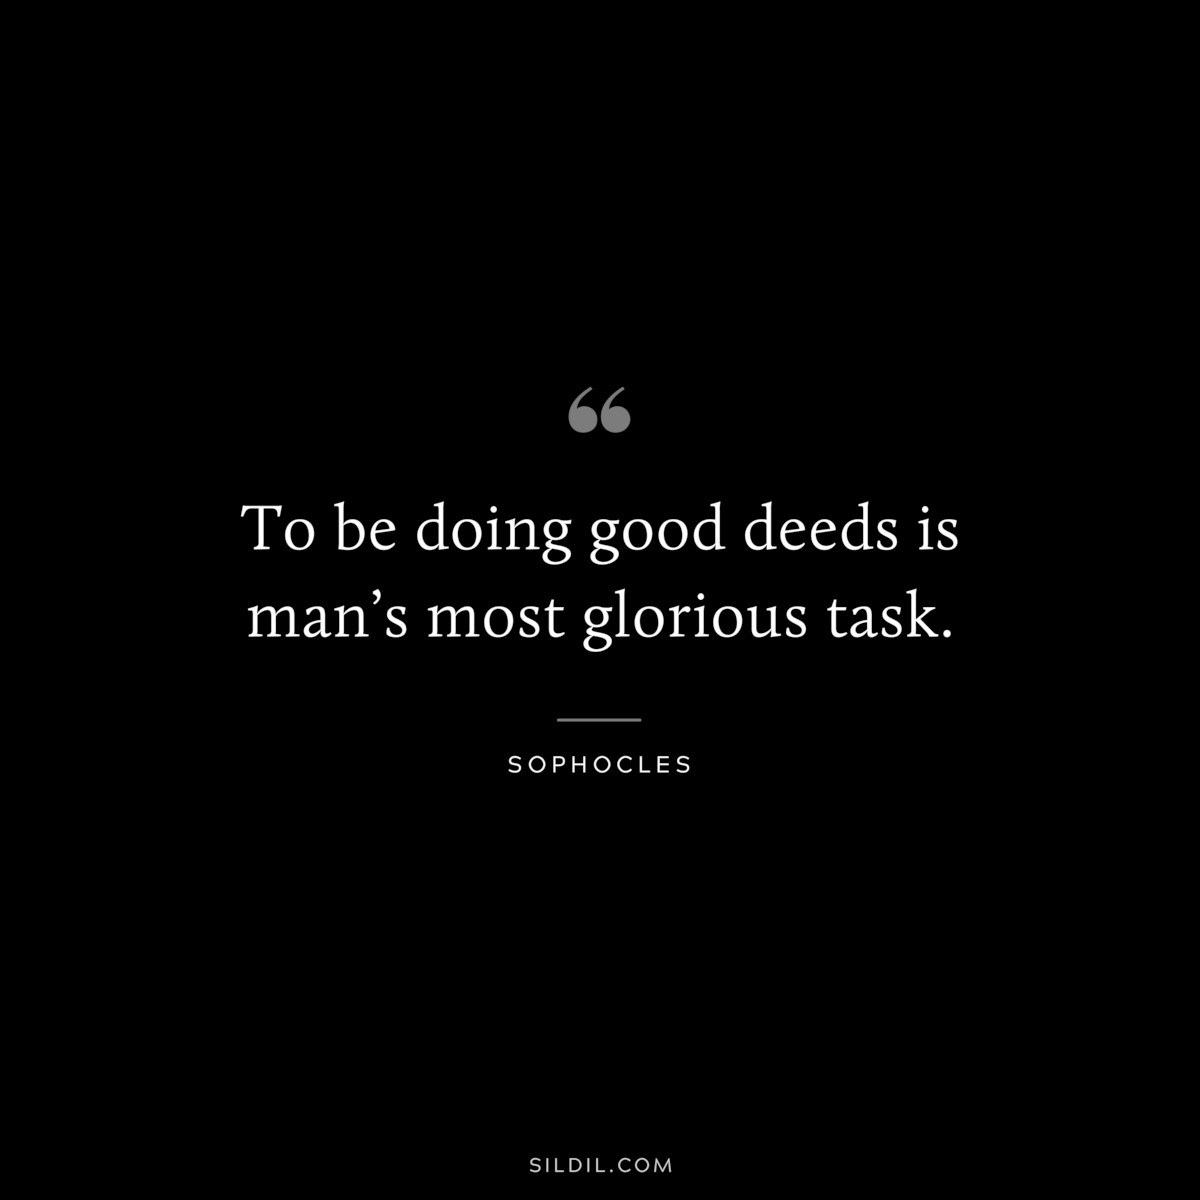 To be doing good deeds is man’s most glorious task. ― Sophocles